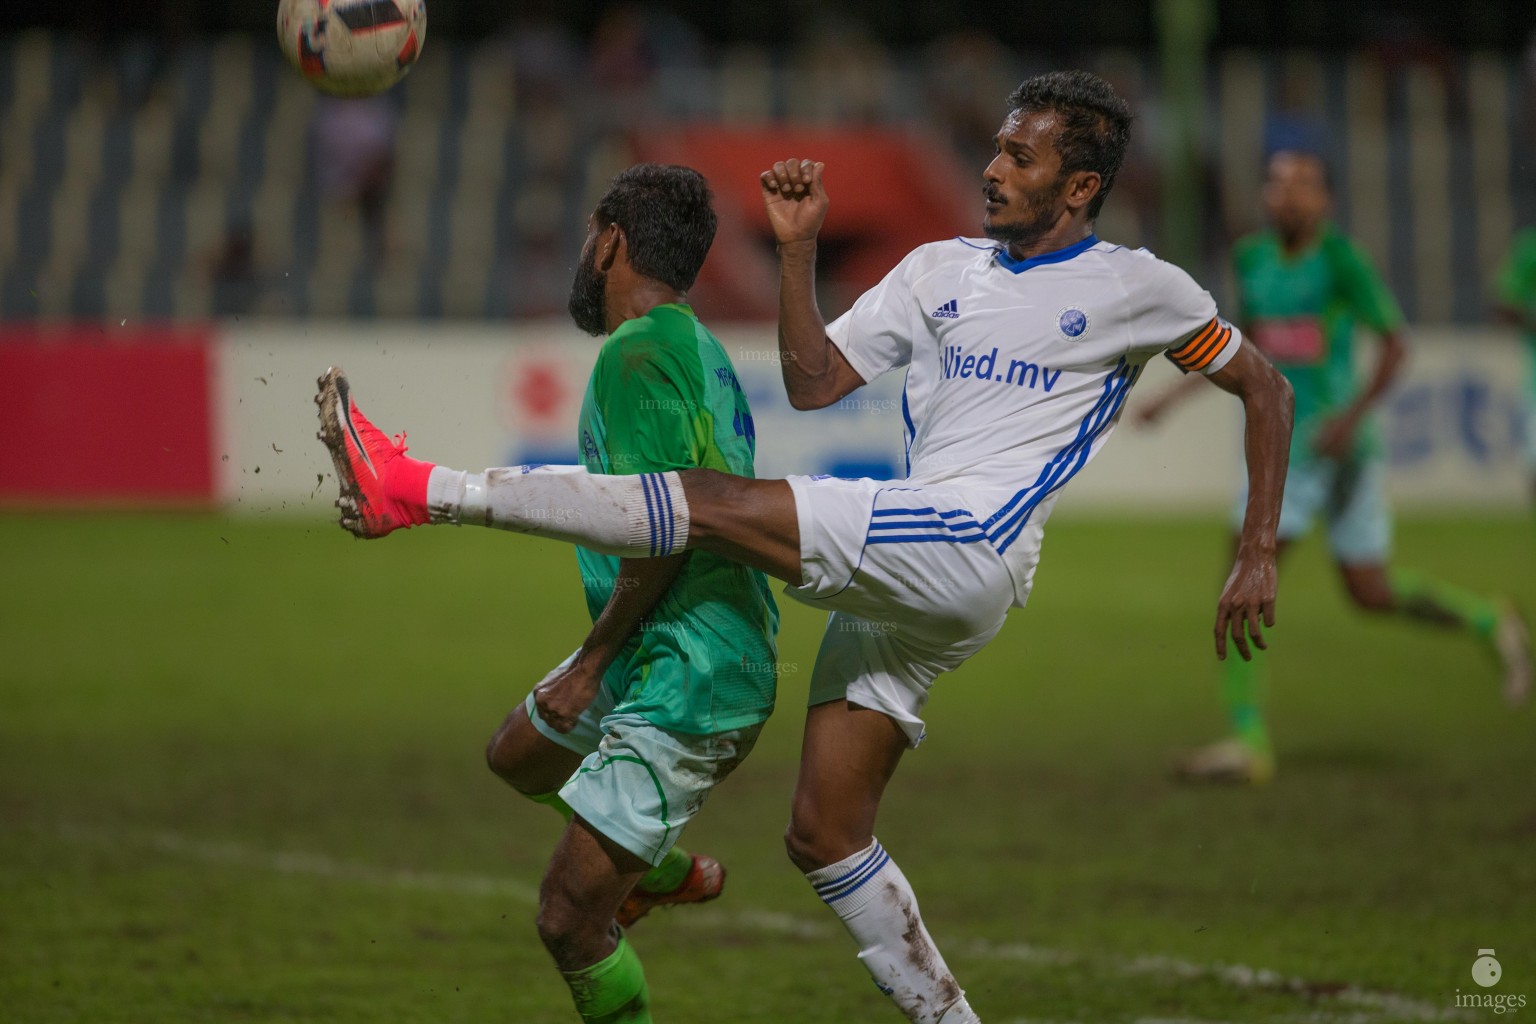 Green Street vs New Radiant Sports Club in the second round of STO Male League. Male , Maldives. Friday day 26 May 2017. (Images.mv Photo/ Abdulla Abeedh).
Green Street vs New Radiant Sports Club in the second round of STO Male League. Male , Maldives. Friday day 26 May 2017. (Images.mv Photo/ Abdulla Abeedh).